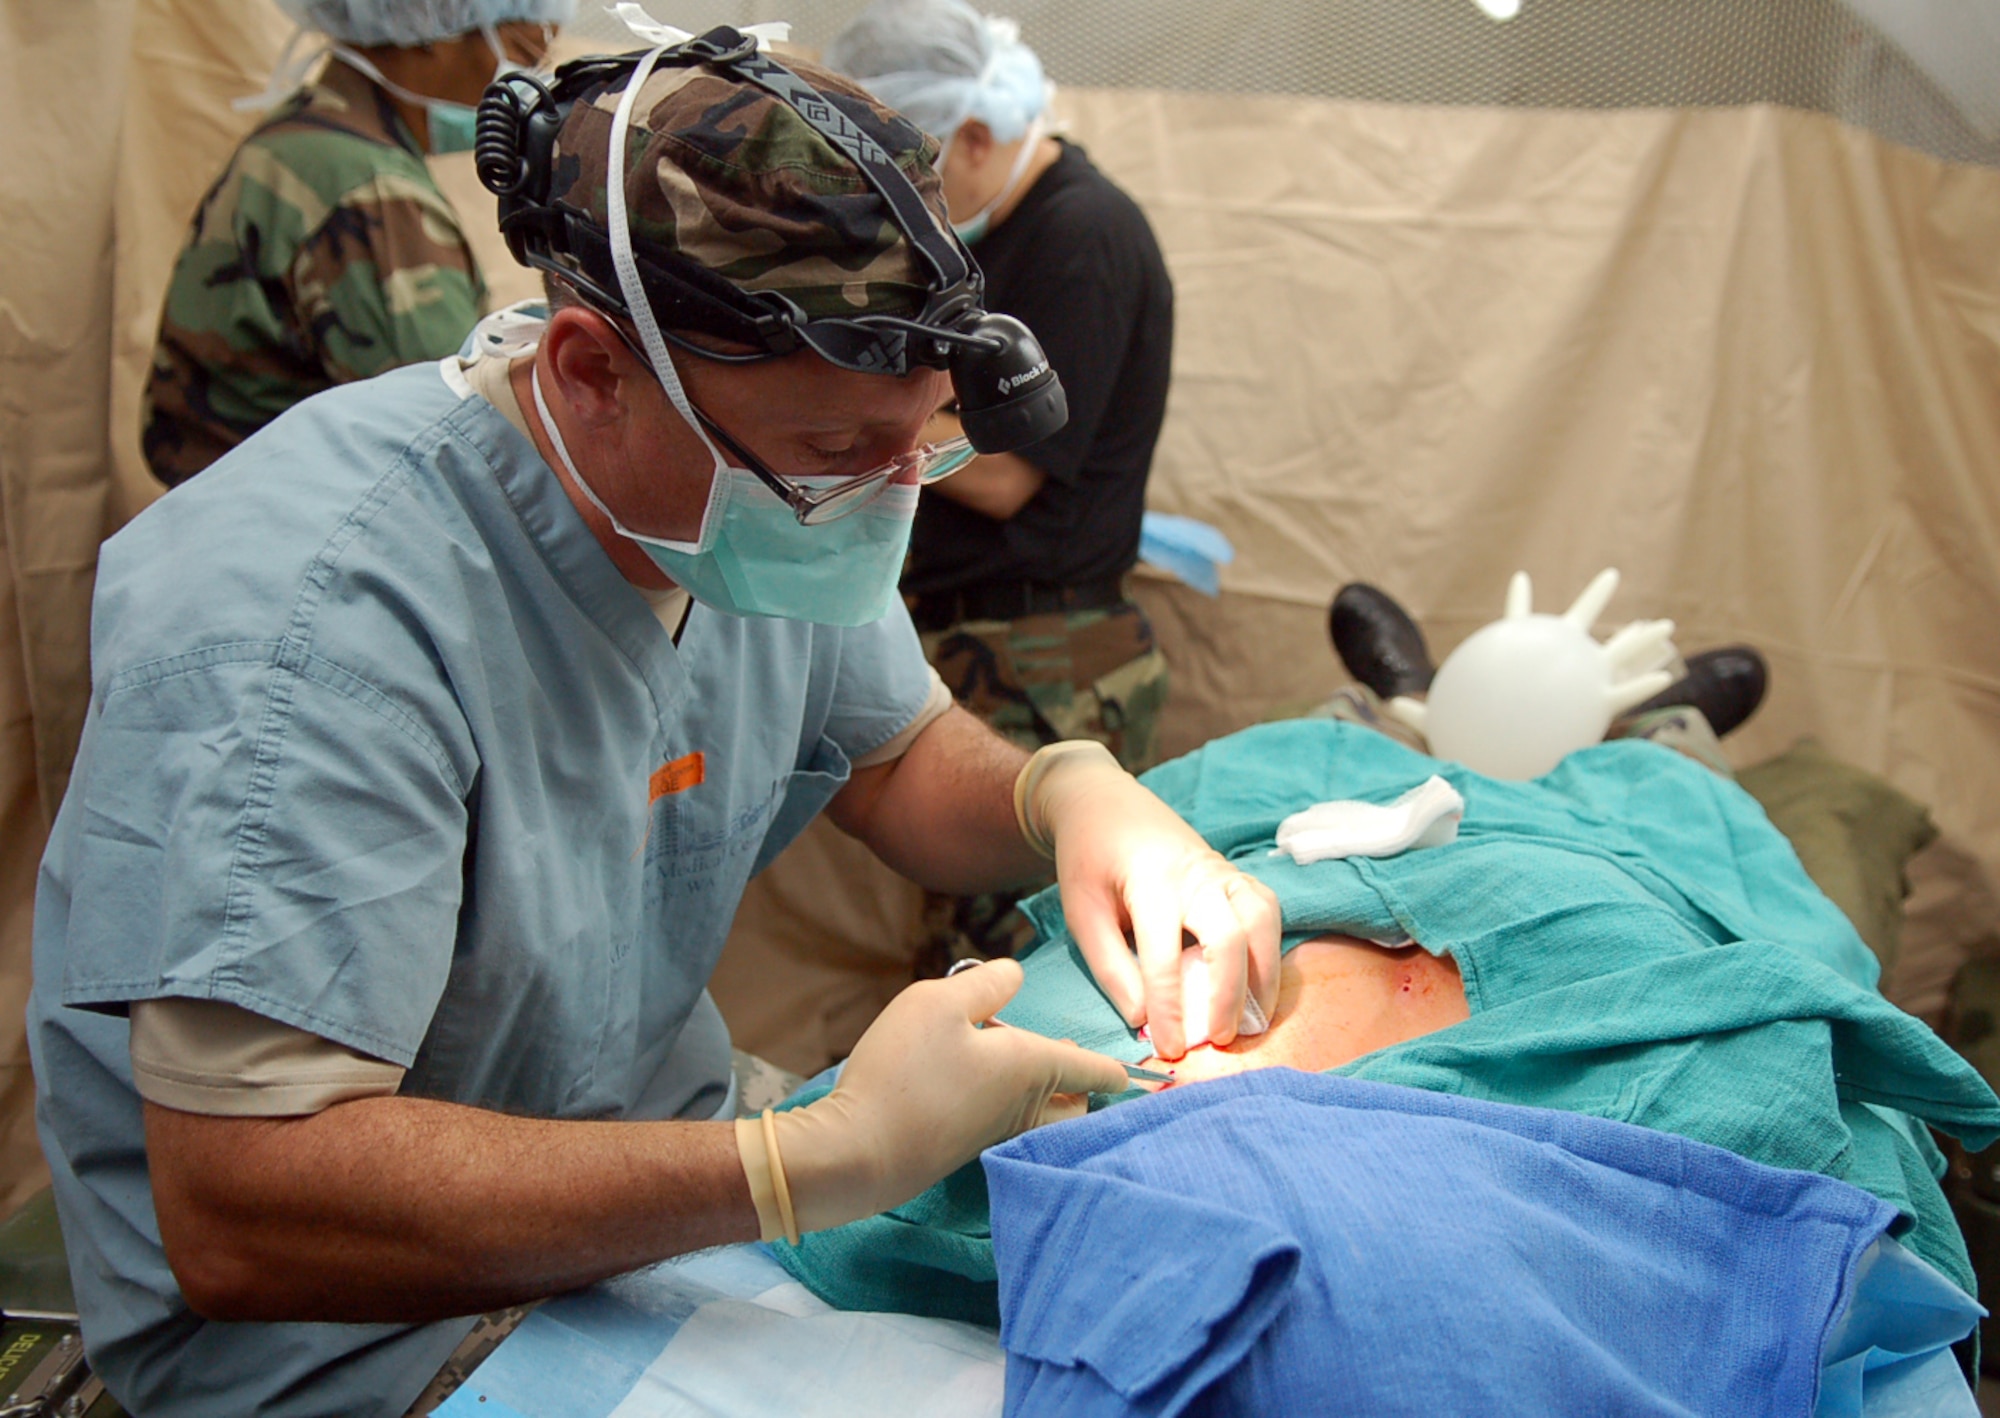 Army Lt. Col. (Dr.) Robert Rush, Joint Task Force-Bravo Medical Element Mobile Surgical Team commander, performs a skin lesion removal in the MST operating room.  The team set up the mobile operating room in an empty field here at night to practice setting up in limited visibility.  (U.S. Air Force photo by Staff Sgt. Austin May)